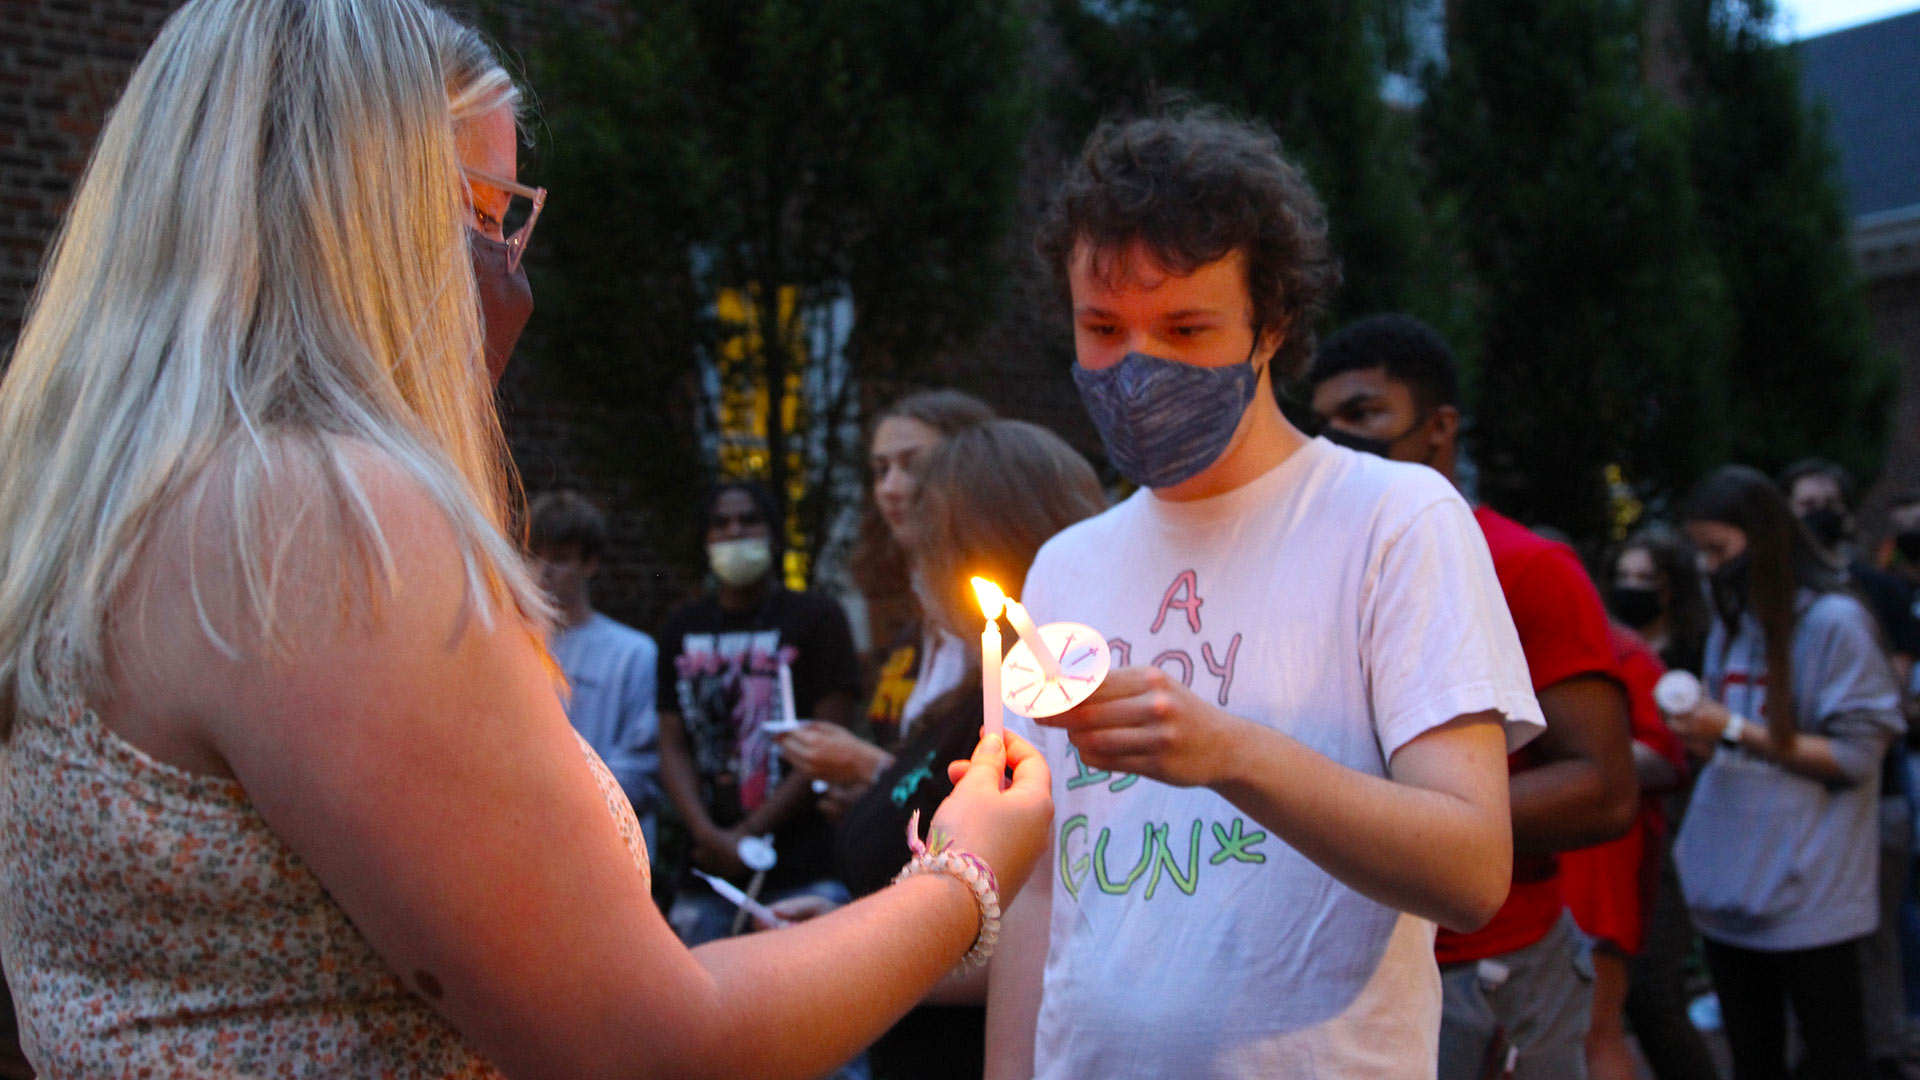 A masked student lights the candle of a student next to them.